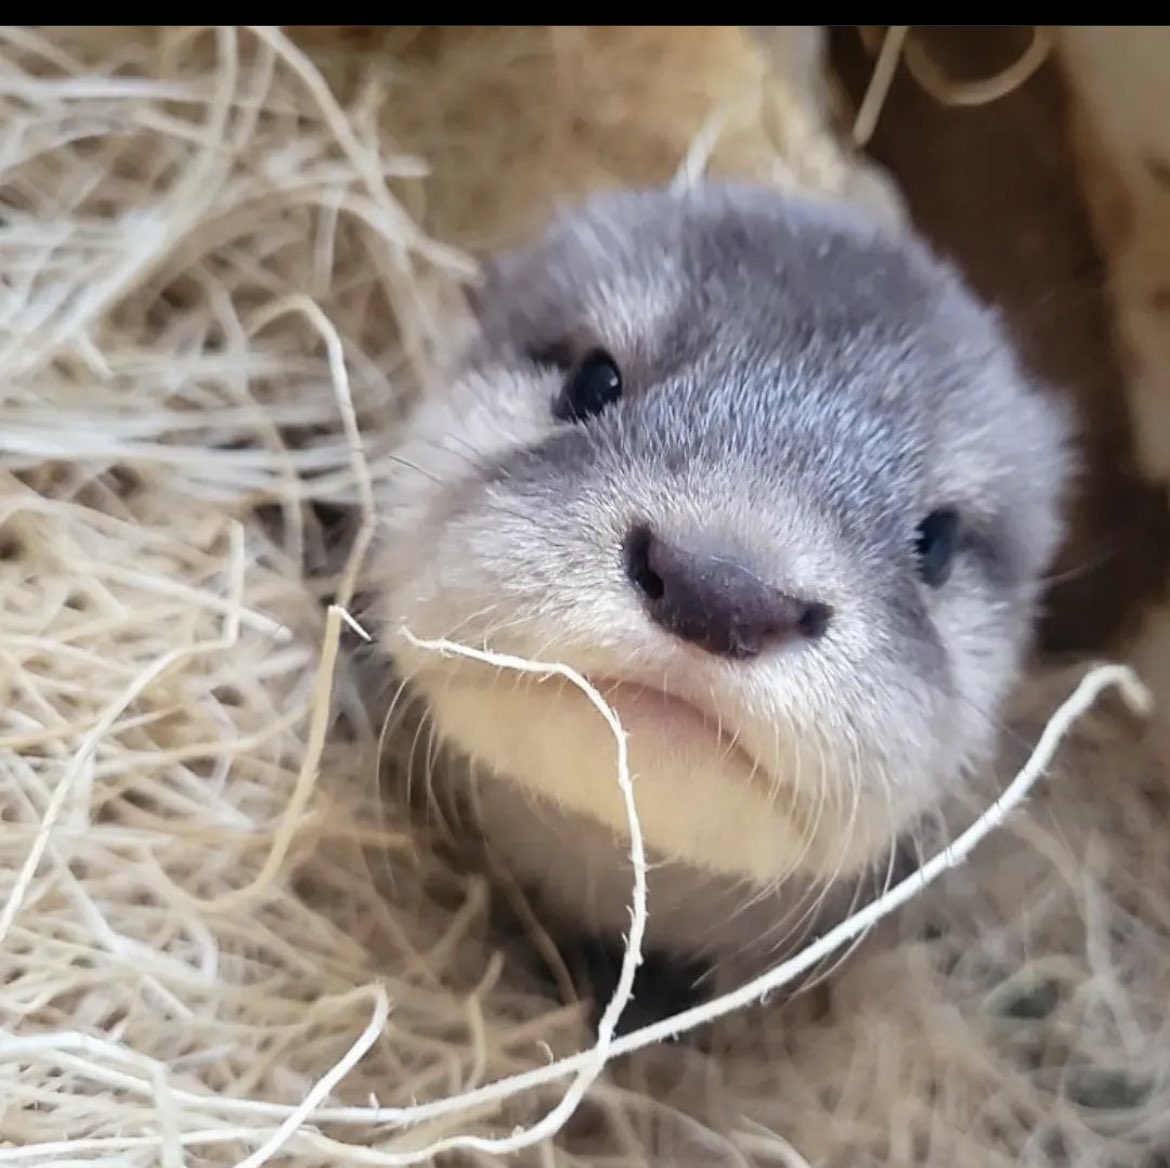 You know what’s not? Liking otters.